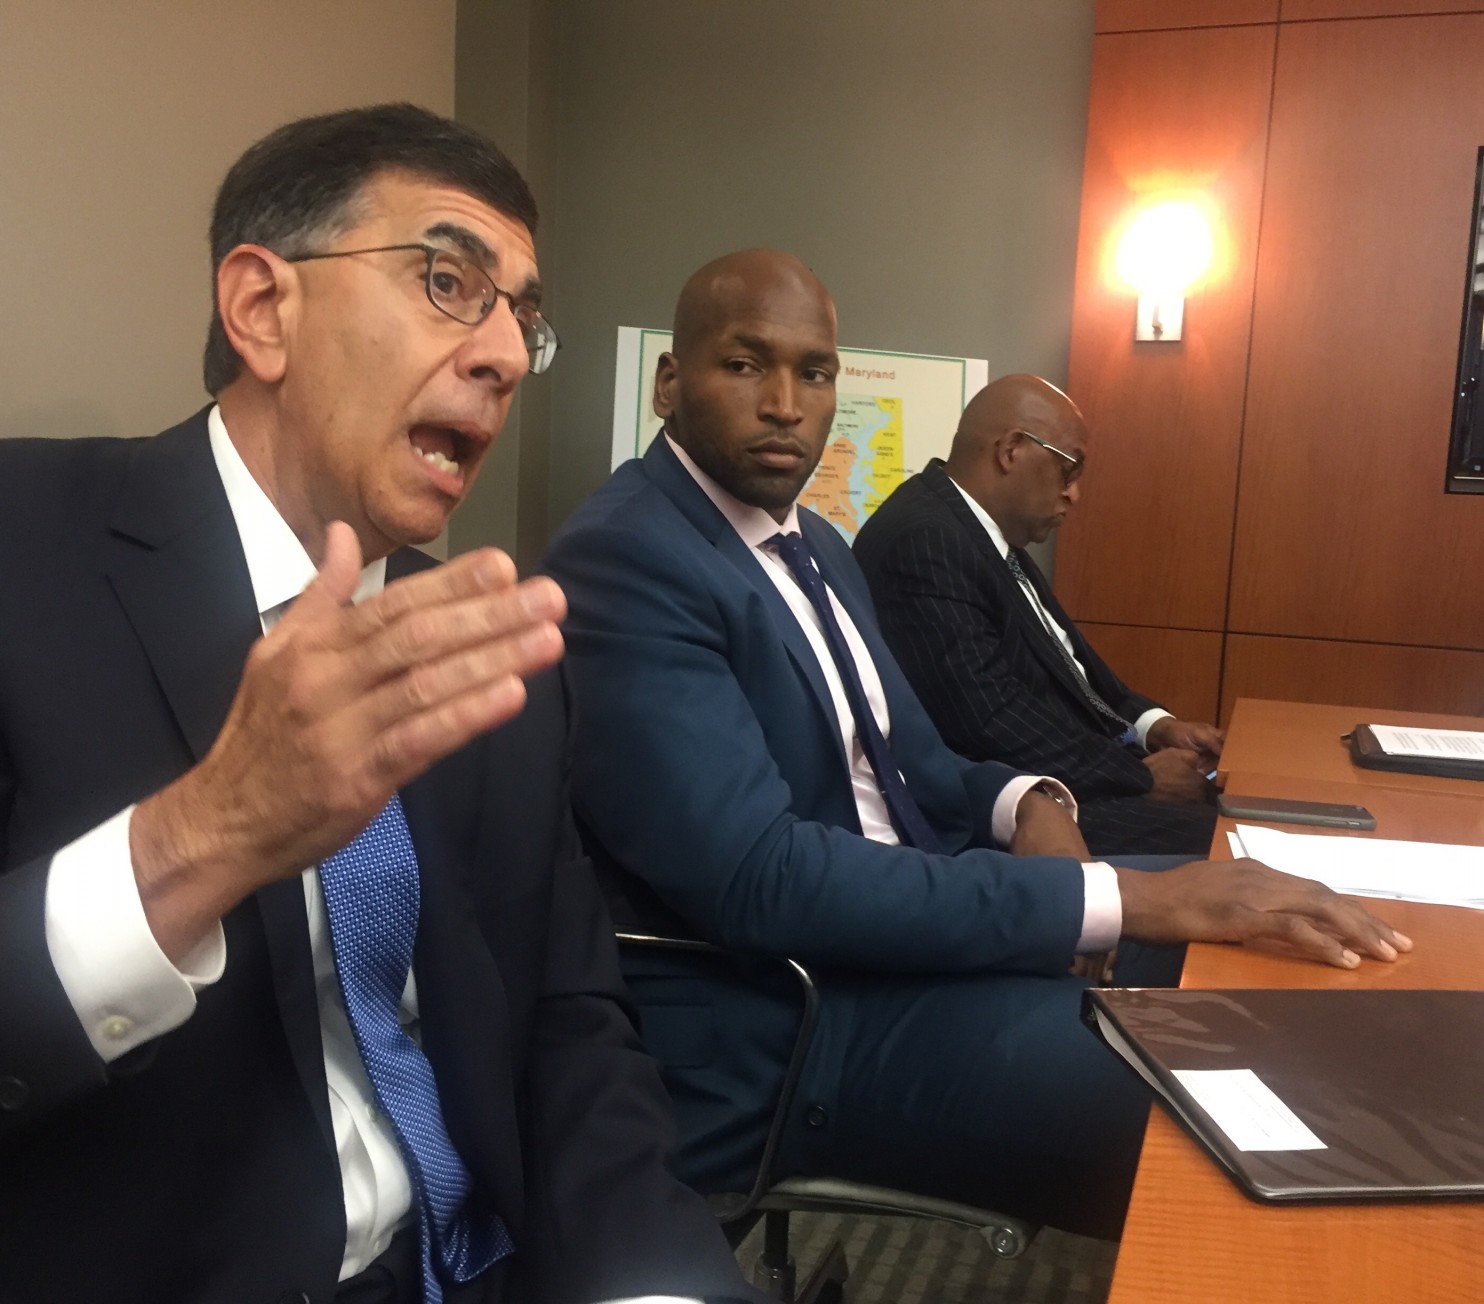 Medical marijuana investor and former Baltimore Ravens tackle Eugene Monroe, center, listens as Phil Andrews, his company's lawyer, tells reporters why Green Thumb Industries is suing Maryland. To the right is GTI general manager Sterling Crockett. (Fenit Nirappil, The Washington Post)